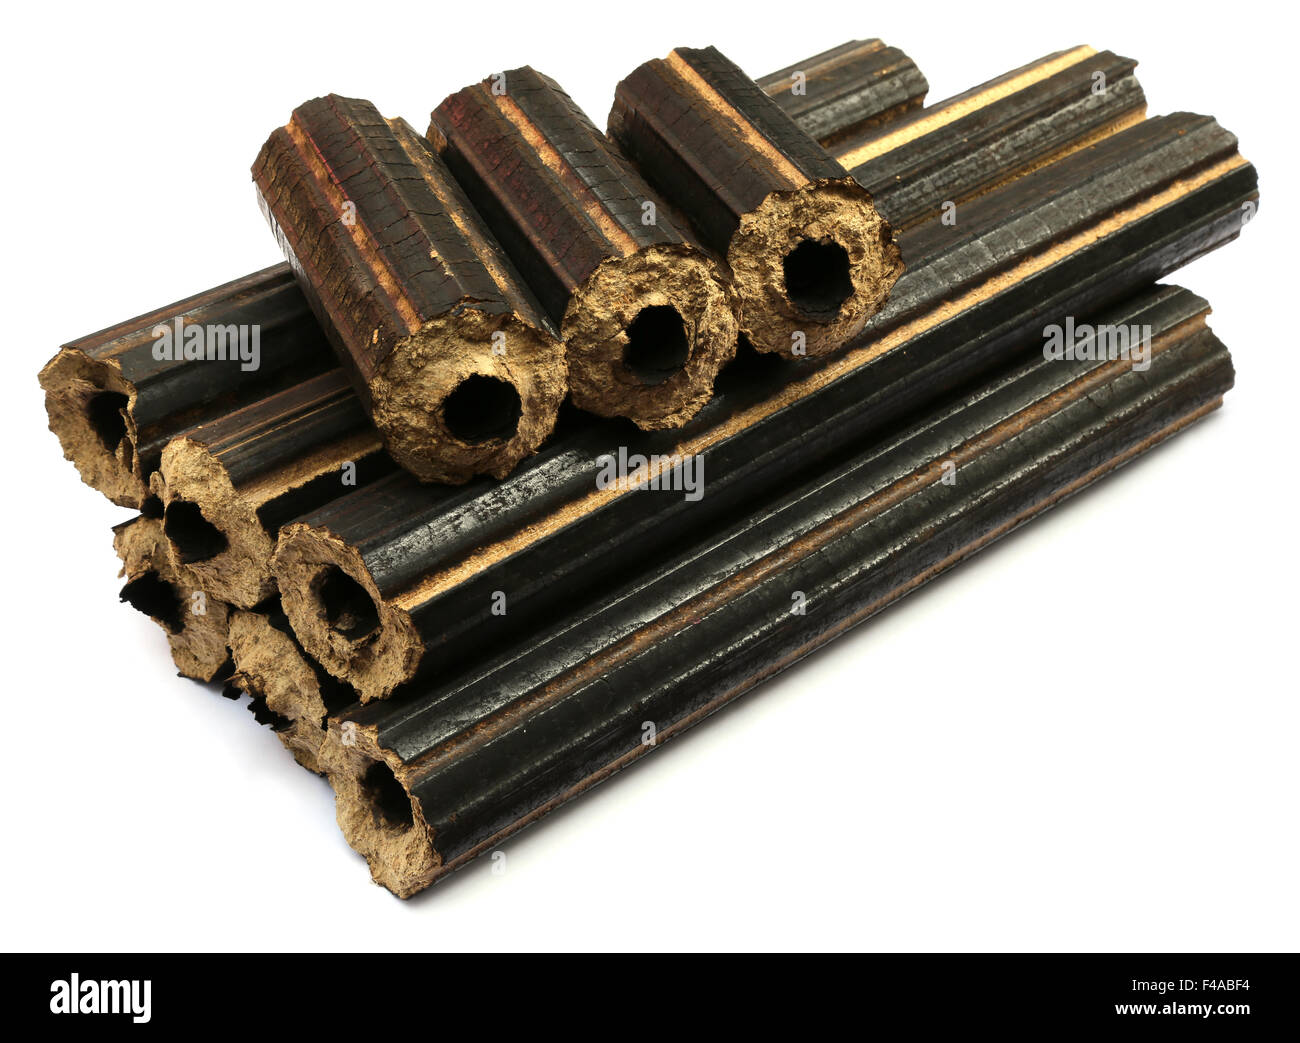 Cheap biofuel made of saw dust over white background Stock Photo